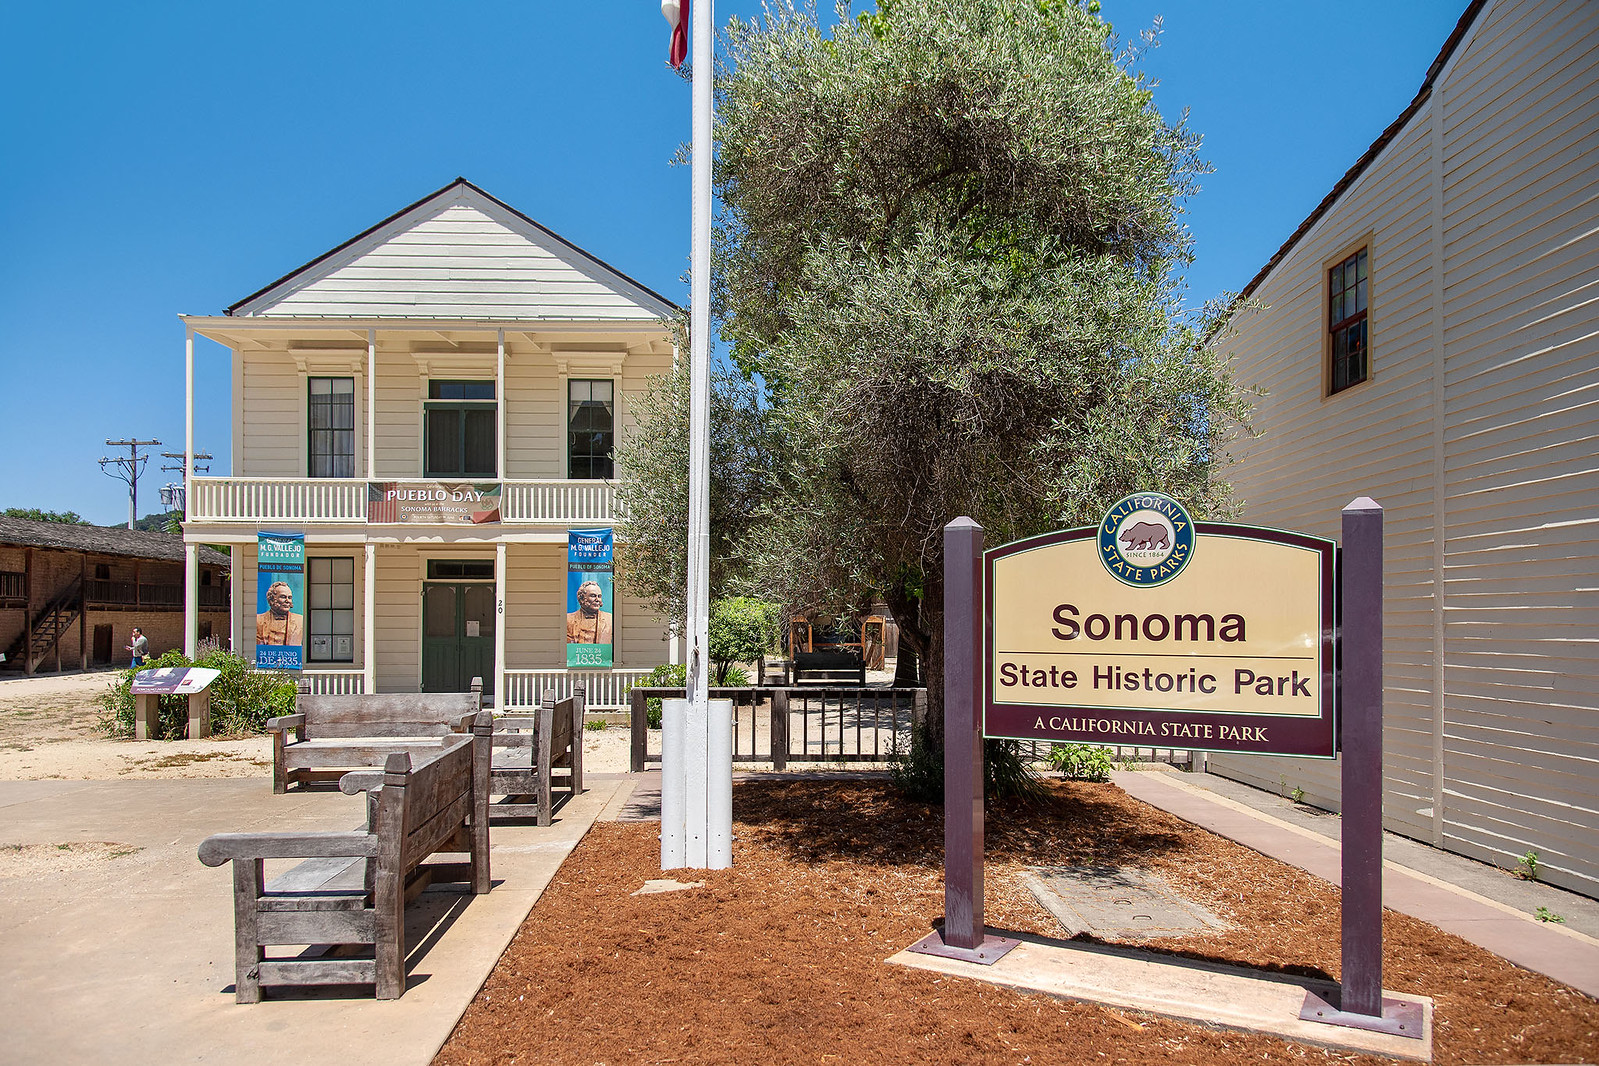 Cover Image for 735 Third Street West, Sonoma presented by Daniel Casabonne